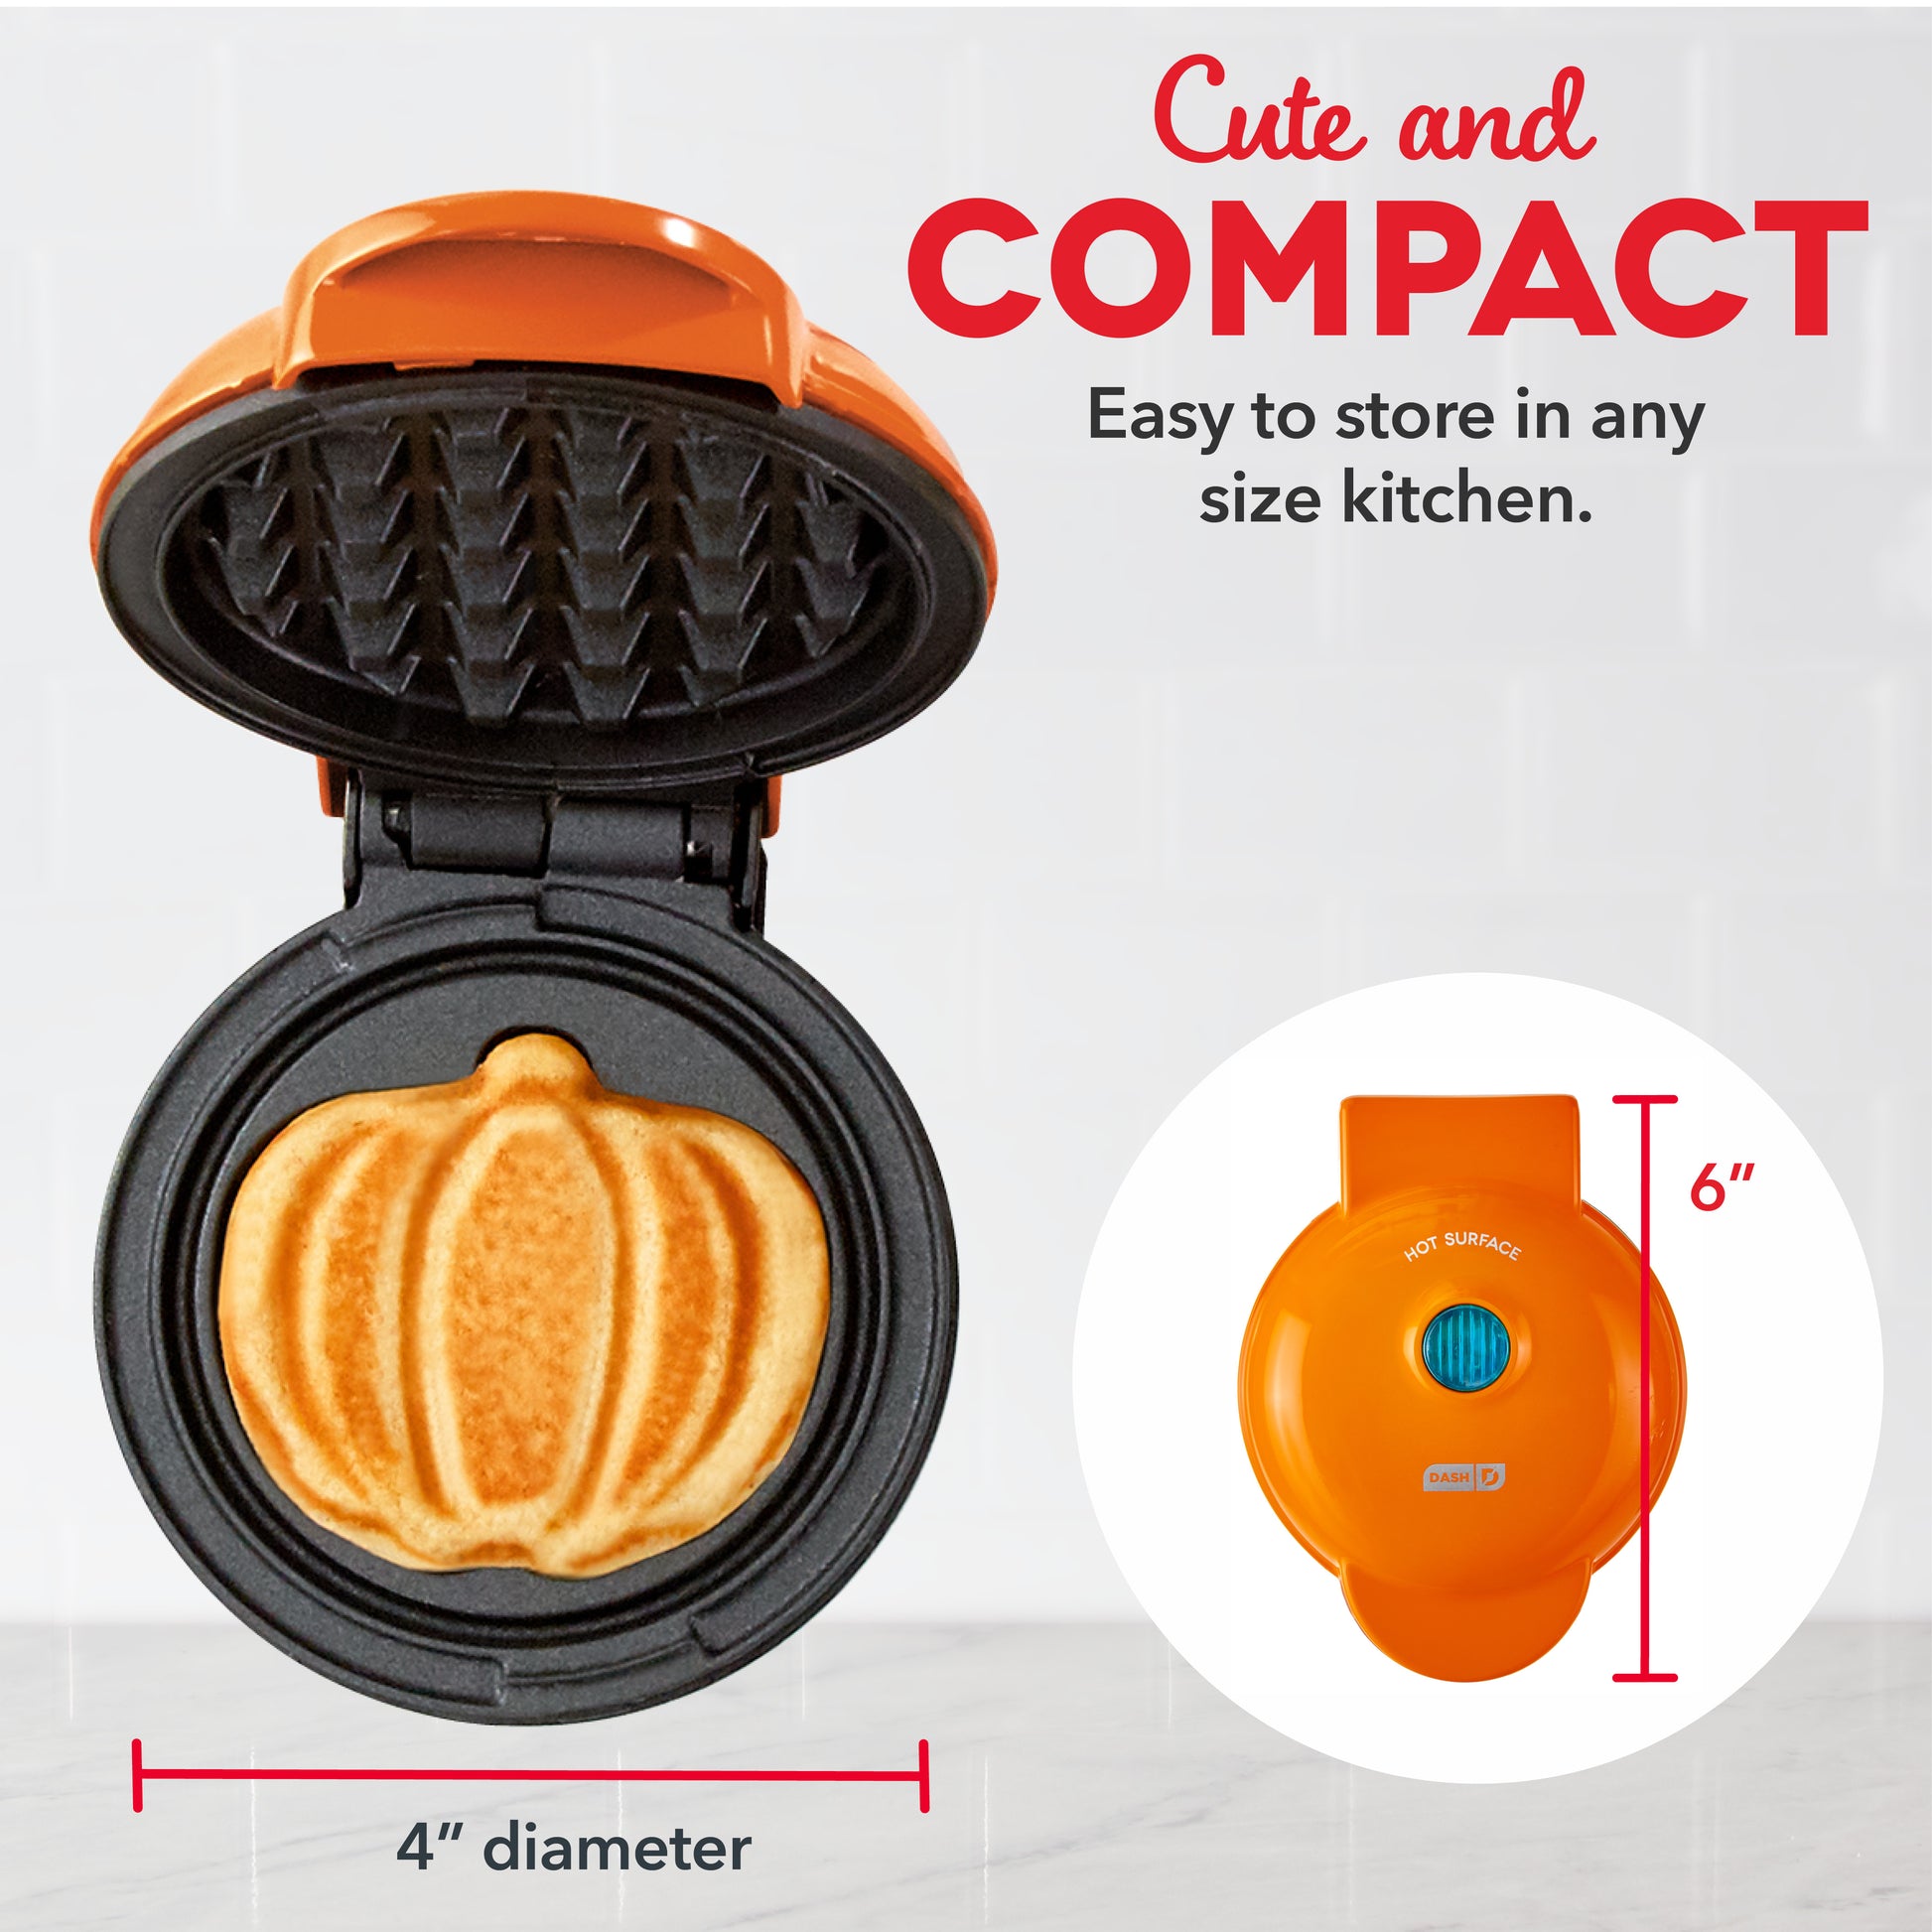 Target Is Selling a New Dash Mini Waffle Maker With an Adorable Flower  Design